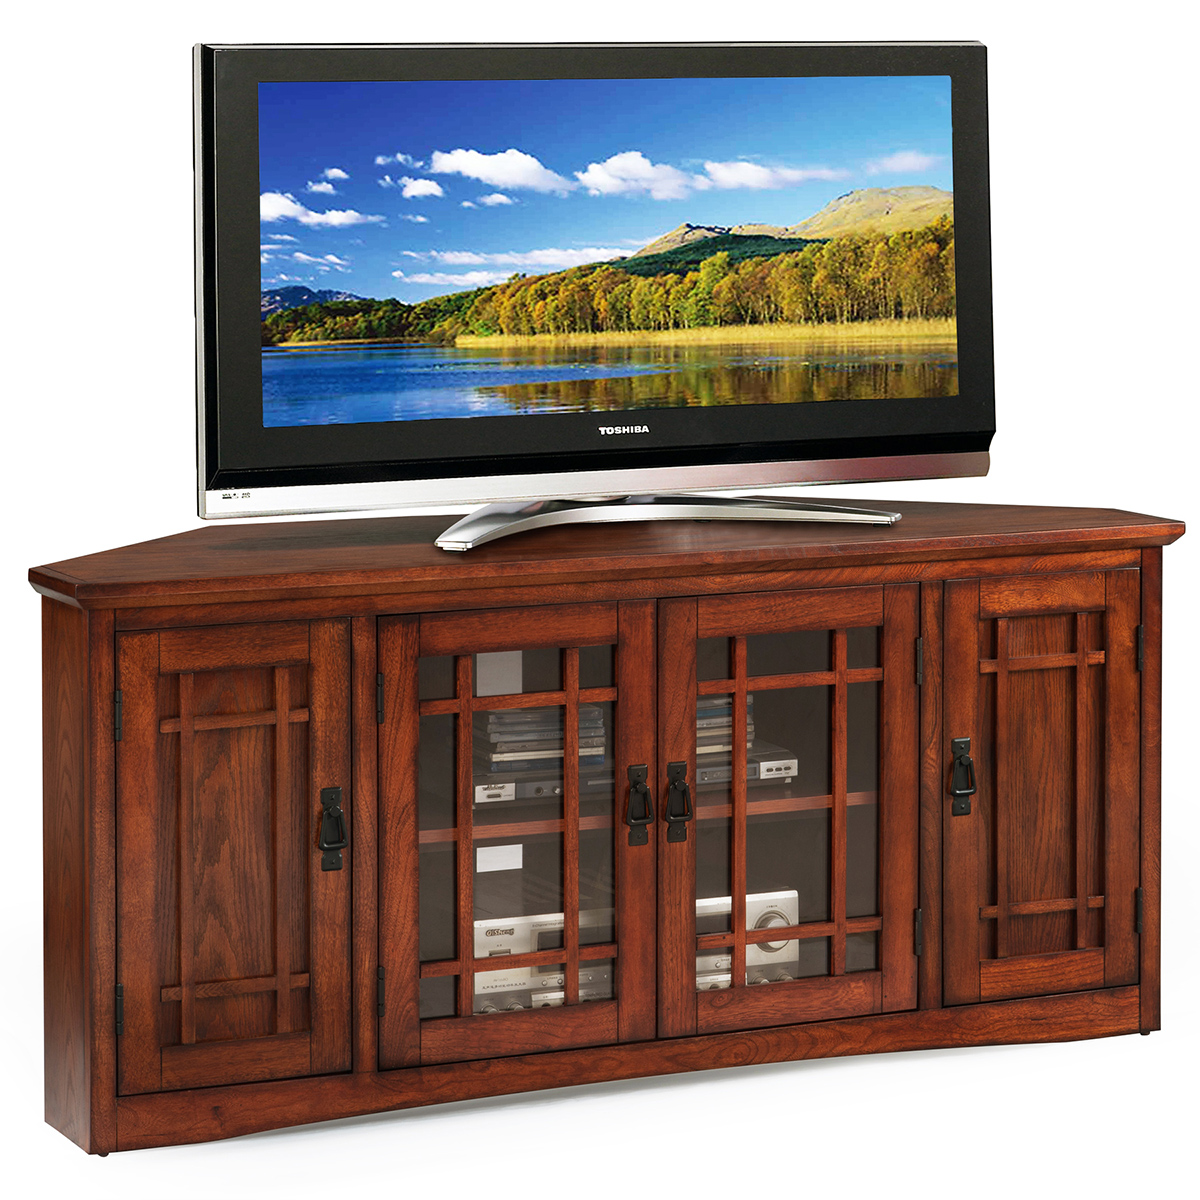 Leick 82386 Mission Style 56" Corner TV Stand in Oak Finish